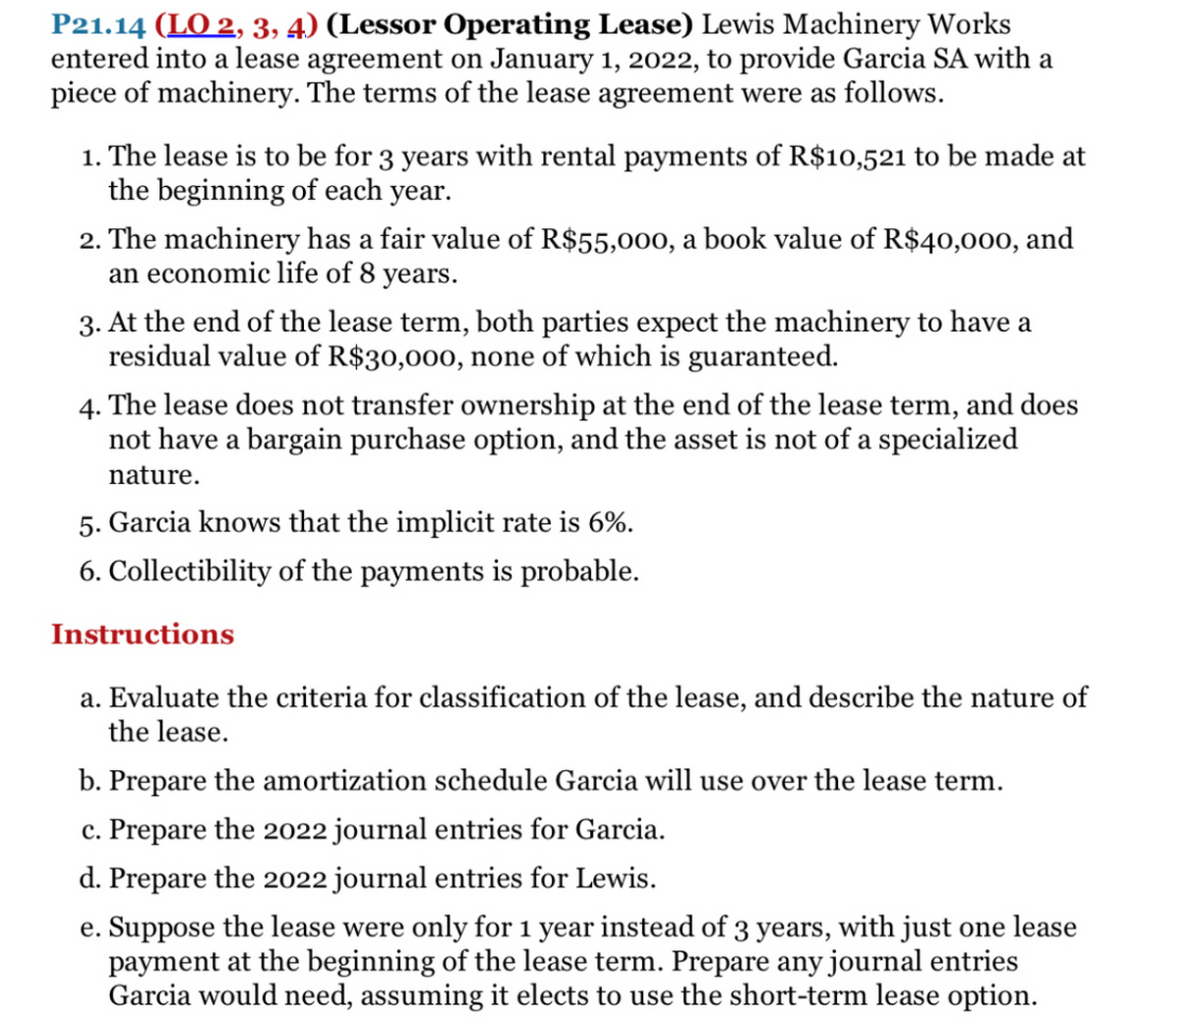 P21.14 (LO 2, 3, 4) (Lessor Operating Lease) Lewis Machinery Works
entered into a lease agreement on January 1, 2022, to provide Garcia SA with a
piece of machinery. The terms of the lease agreement were as follows.
1. The lease is to be for 3 years with rental payments of R$10,521 to be made at
the beginning of each year.
2. The machinery has a fair value of R$55,000, a book value of R$40,000, and
an economic life of 8 years.
3. At the end of the lease term, both parties expect the machinery to have a
residual value of R$30,000, none of which is guaranteed.
4. The lease does not transfer ownership at the end of the lease term, and does
not have a bargain purchase option, and the asset is not of a specialized
nature.
5. Garcia knows that the implicit rate is 6%.
6. Collectibility of the payments is probable.
Instructions
a. Evaluate the criteria for classification of the lease, and describe the nature of
the lease.
b. Prepare the amortization schedule Garcia will use over the lease term.
c. Prepare the 2022 journal entries for Garcia.
d. Prepare the 2022 journal entries for Lewis.
e. Suppose the lease were only for 1 year instead of 3 years, with just one lease
payment at the beginning of the lease term. Prepare any journal entries
Garcia would need, assuming it elects to use the short-term lease option.
